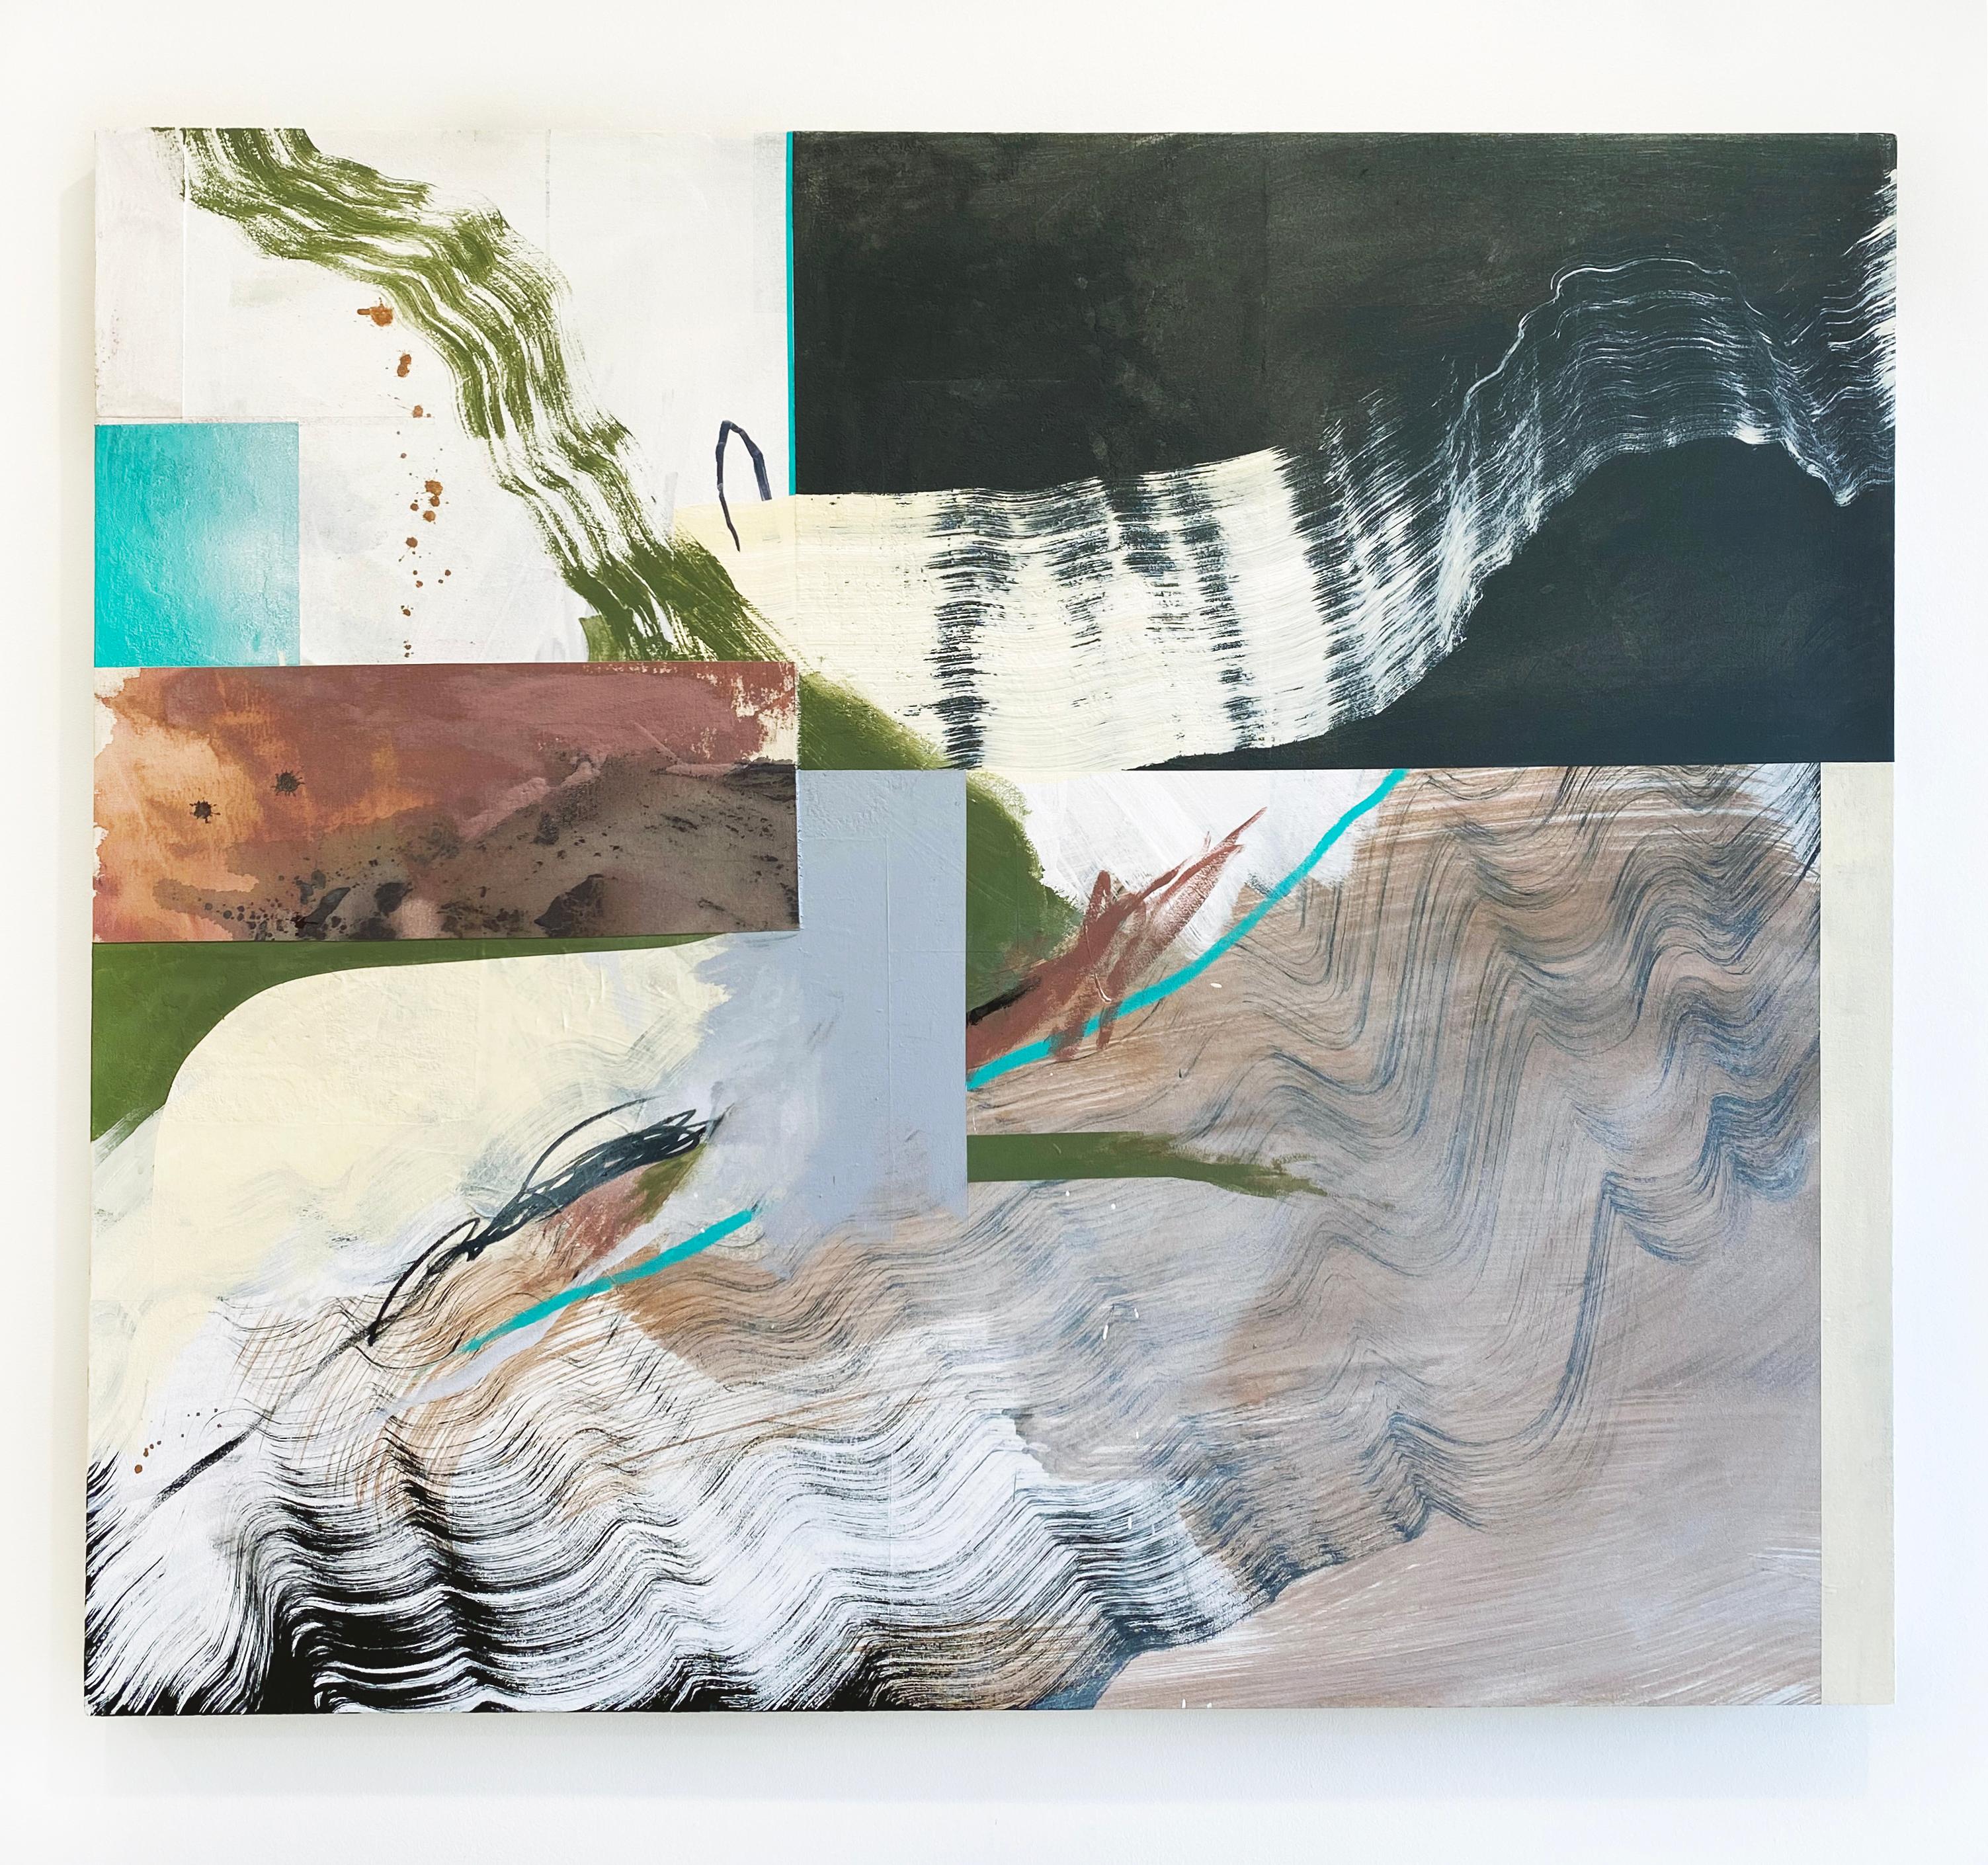 'Delayed Separation' 2021 by Contemporary American artist, Rebecca Stern. Acrylic, ink, spray paint, and fabric on canvas, 42 x 48 in. This painting incorporates mostly a soft palette of colors in white, beige, grey, brown, and black on